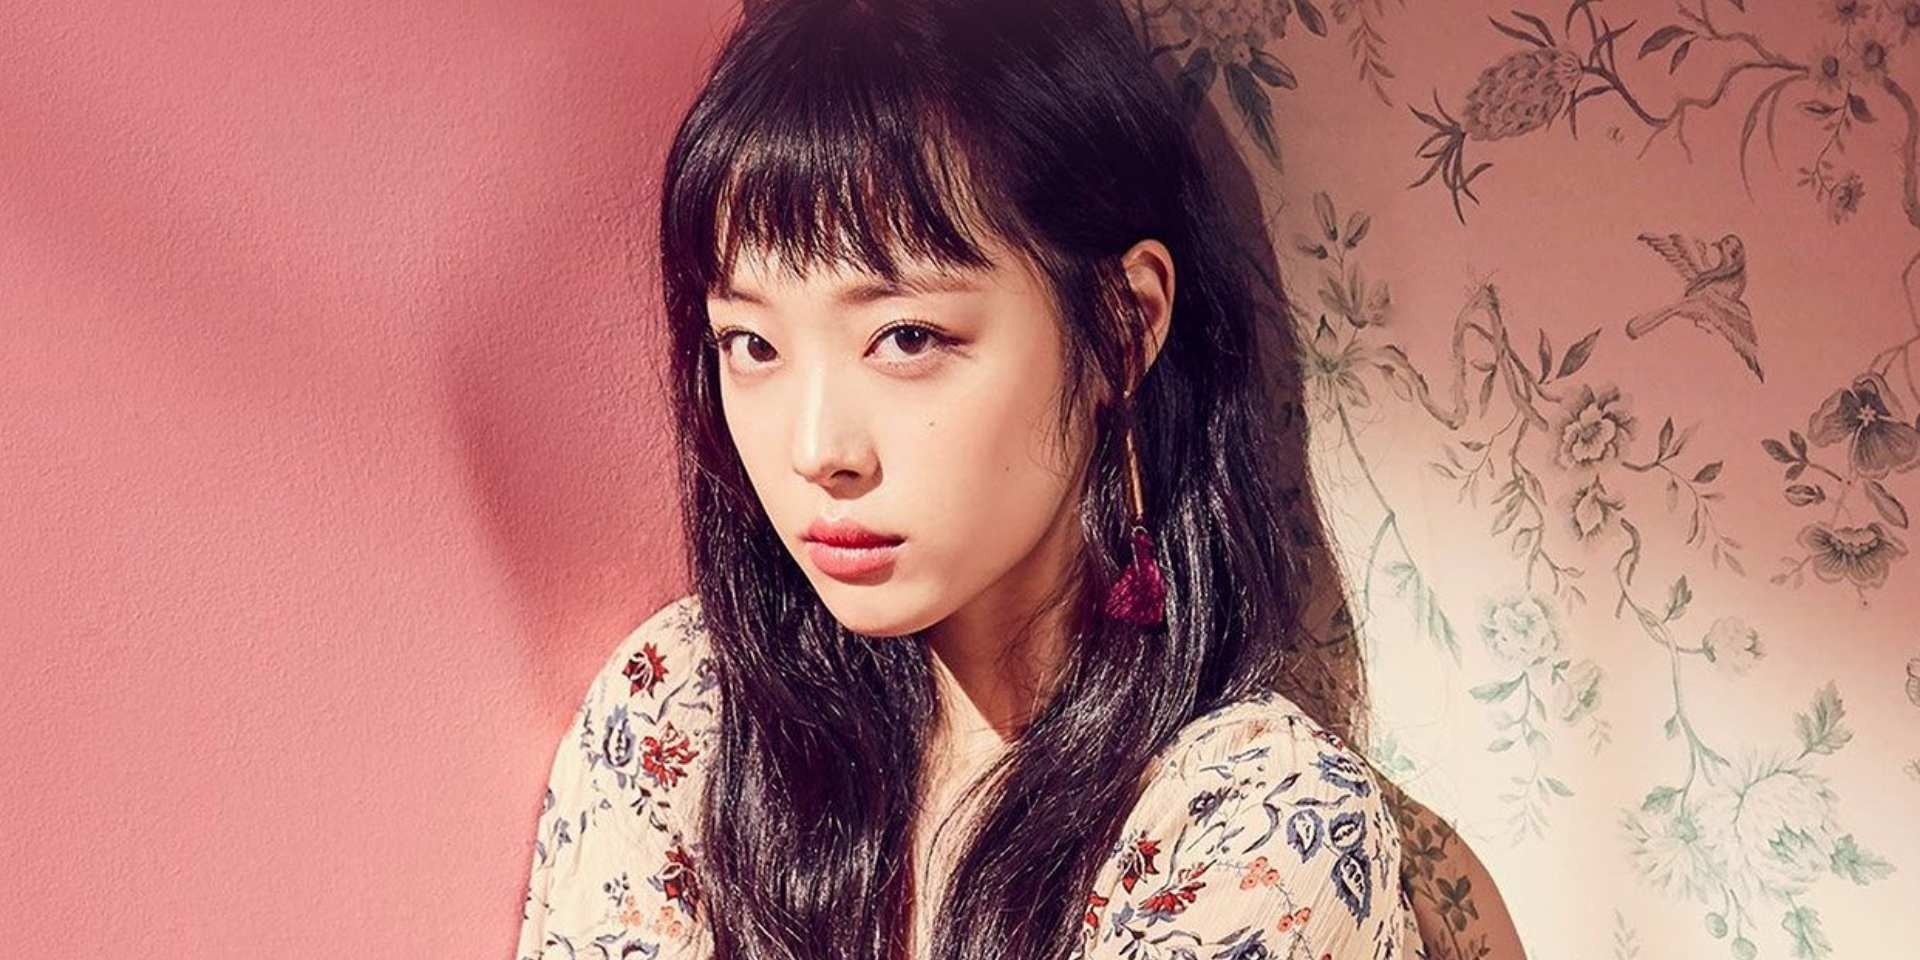 Aaron Yan, Rainie Yang, Lulu, and more call out cyberbullying in the wake of Sulli's death 